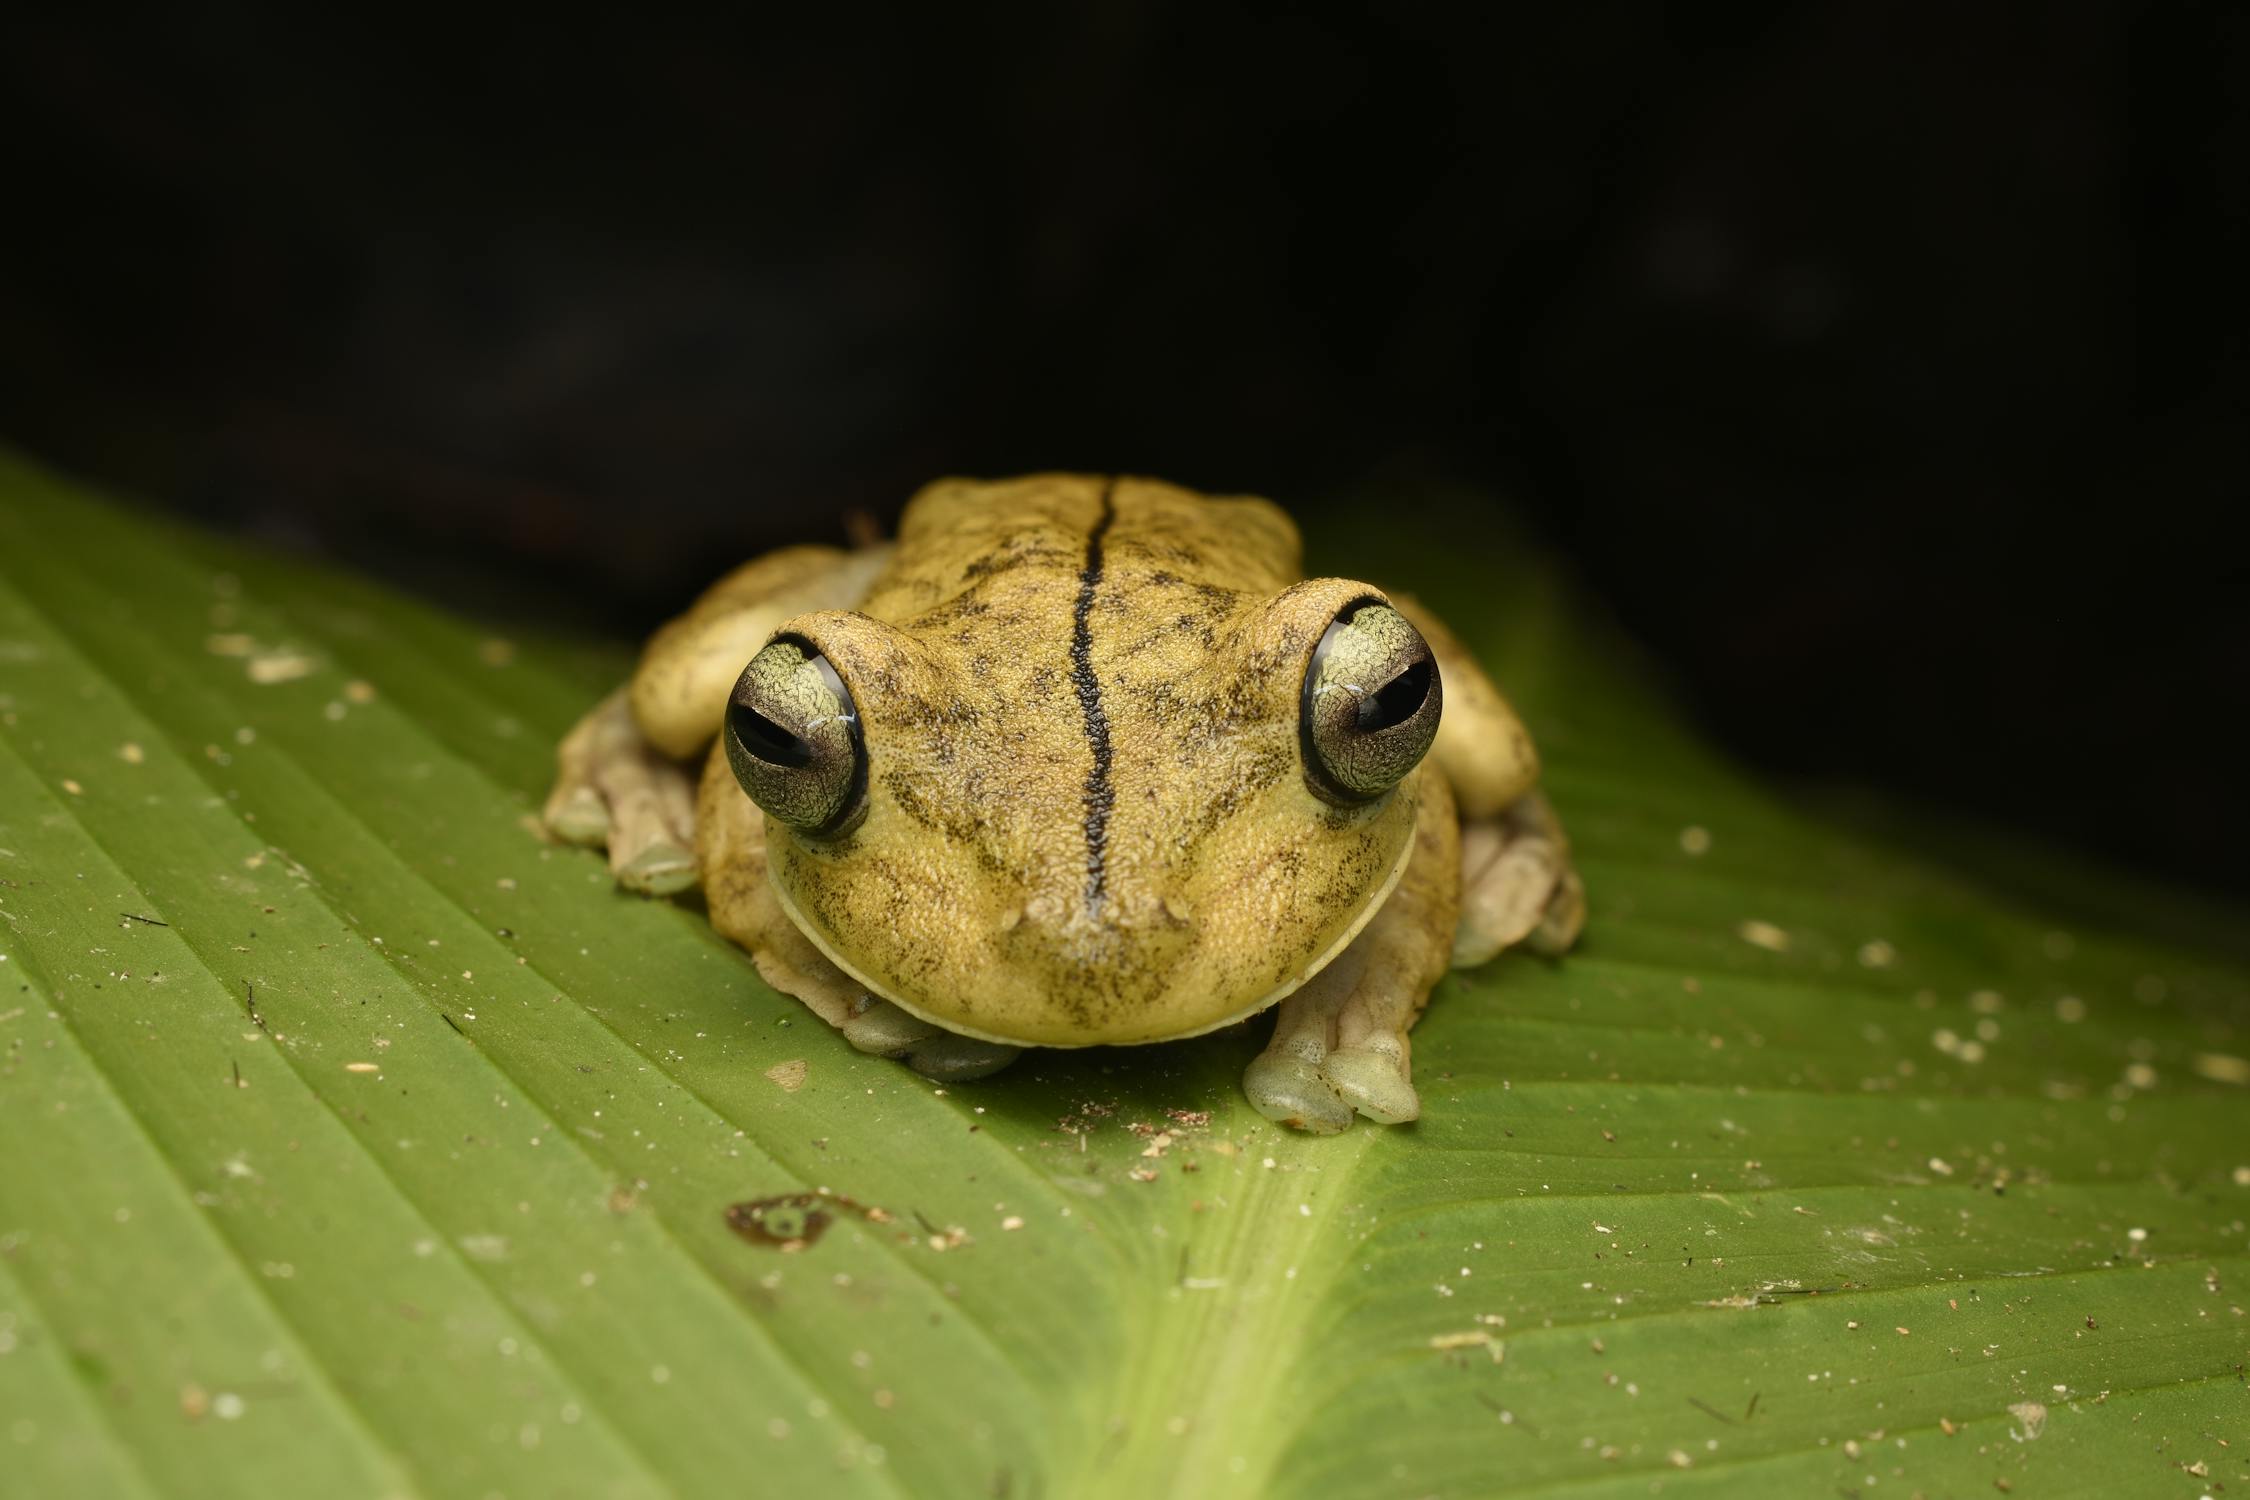 Save The Frogs Ecotours Survey